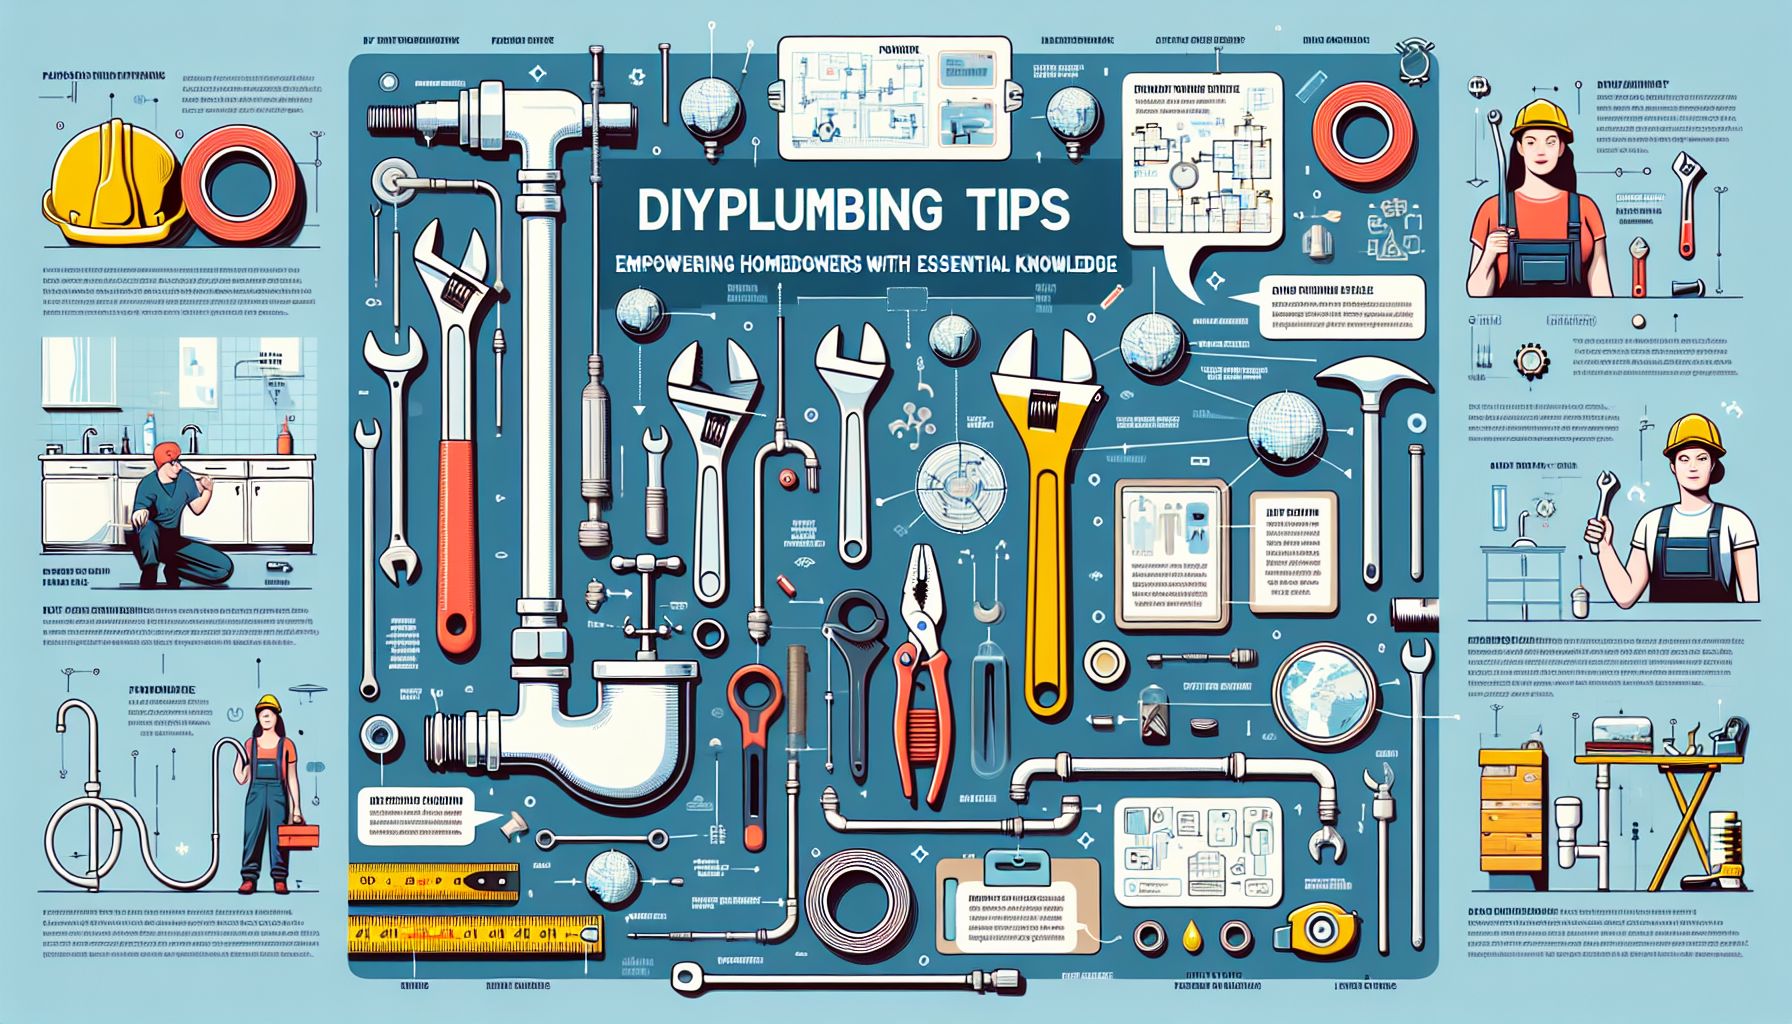 DIY Plumbing Tips: Empowering Homeowners with Essential Knowledge